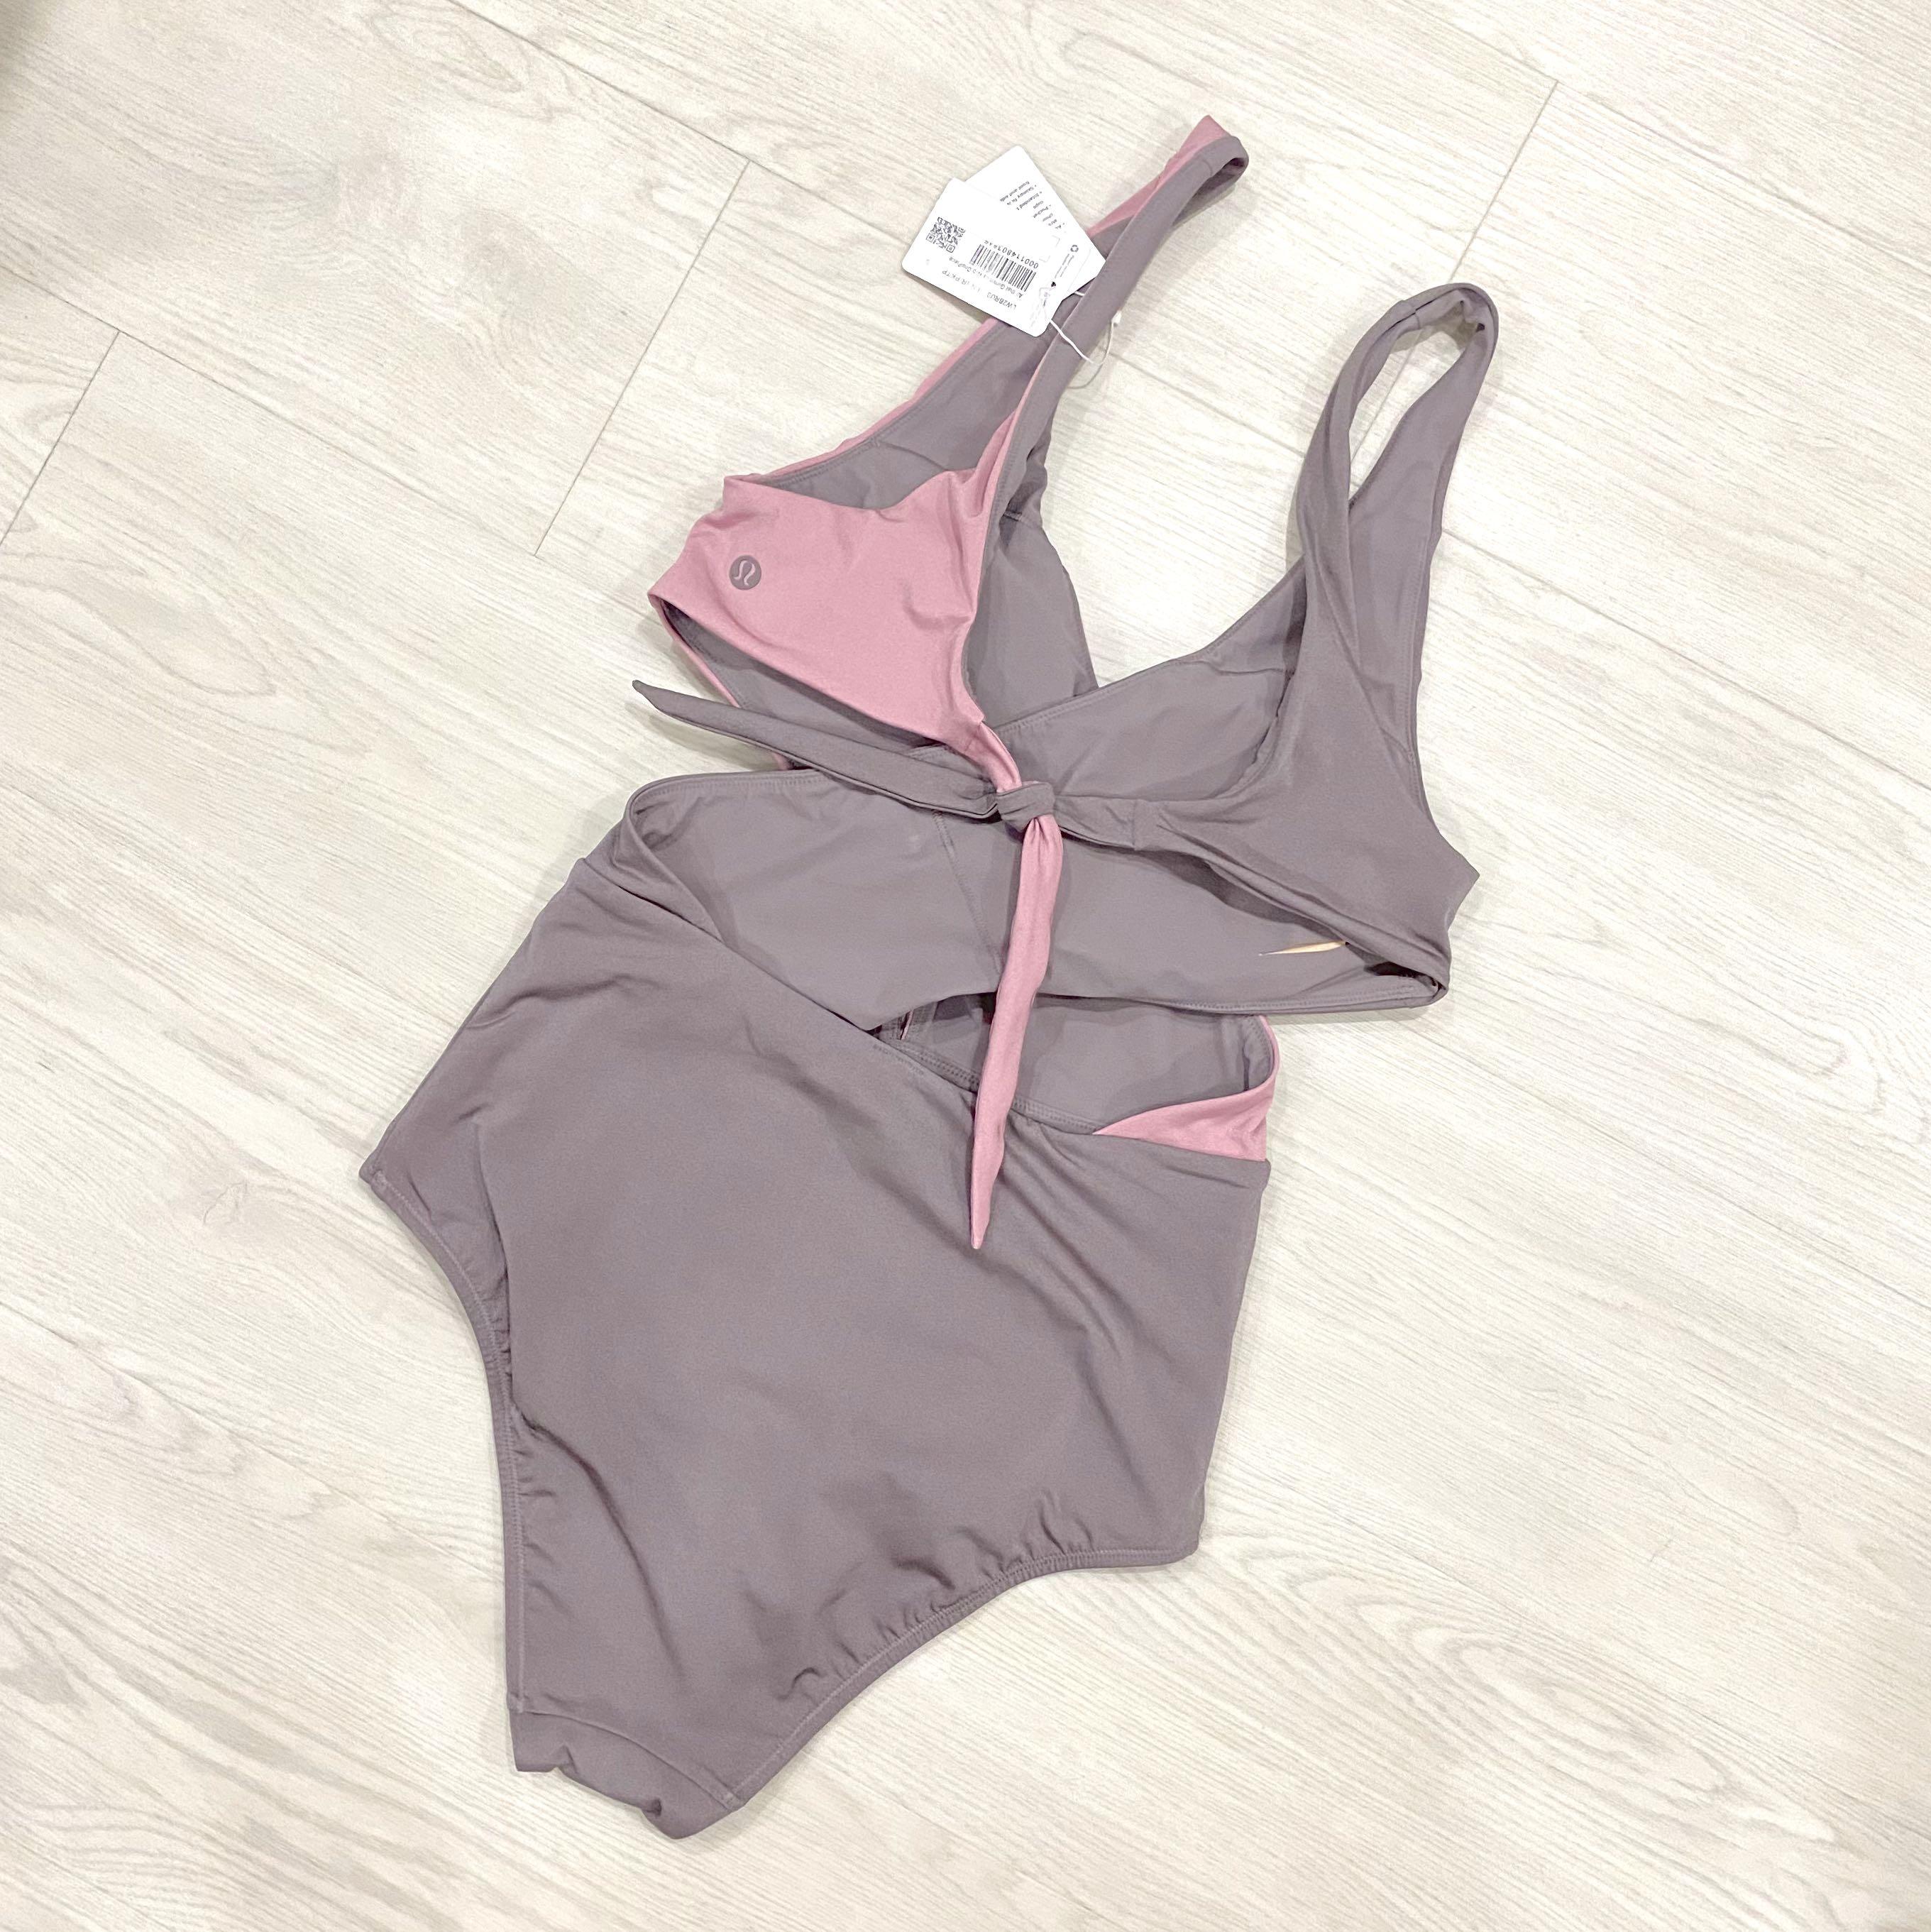 Lululemon All That Glimmers Swim Top Lunar Rock Pink Taupe A/B Cup